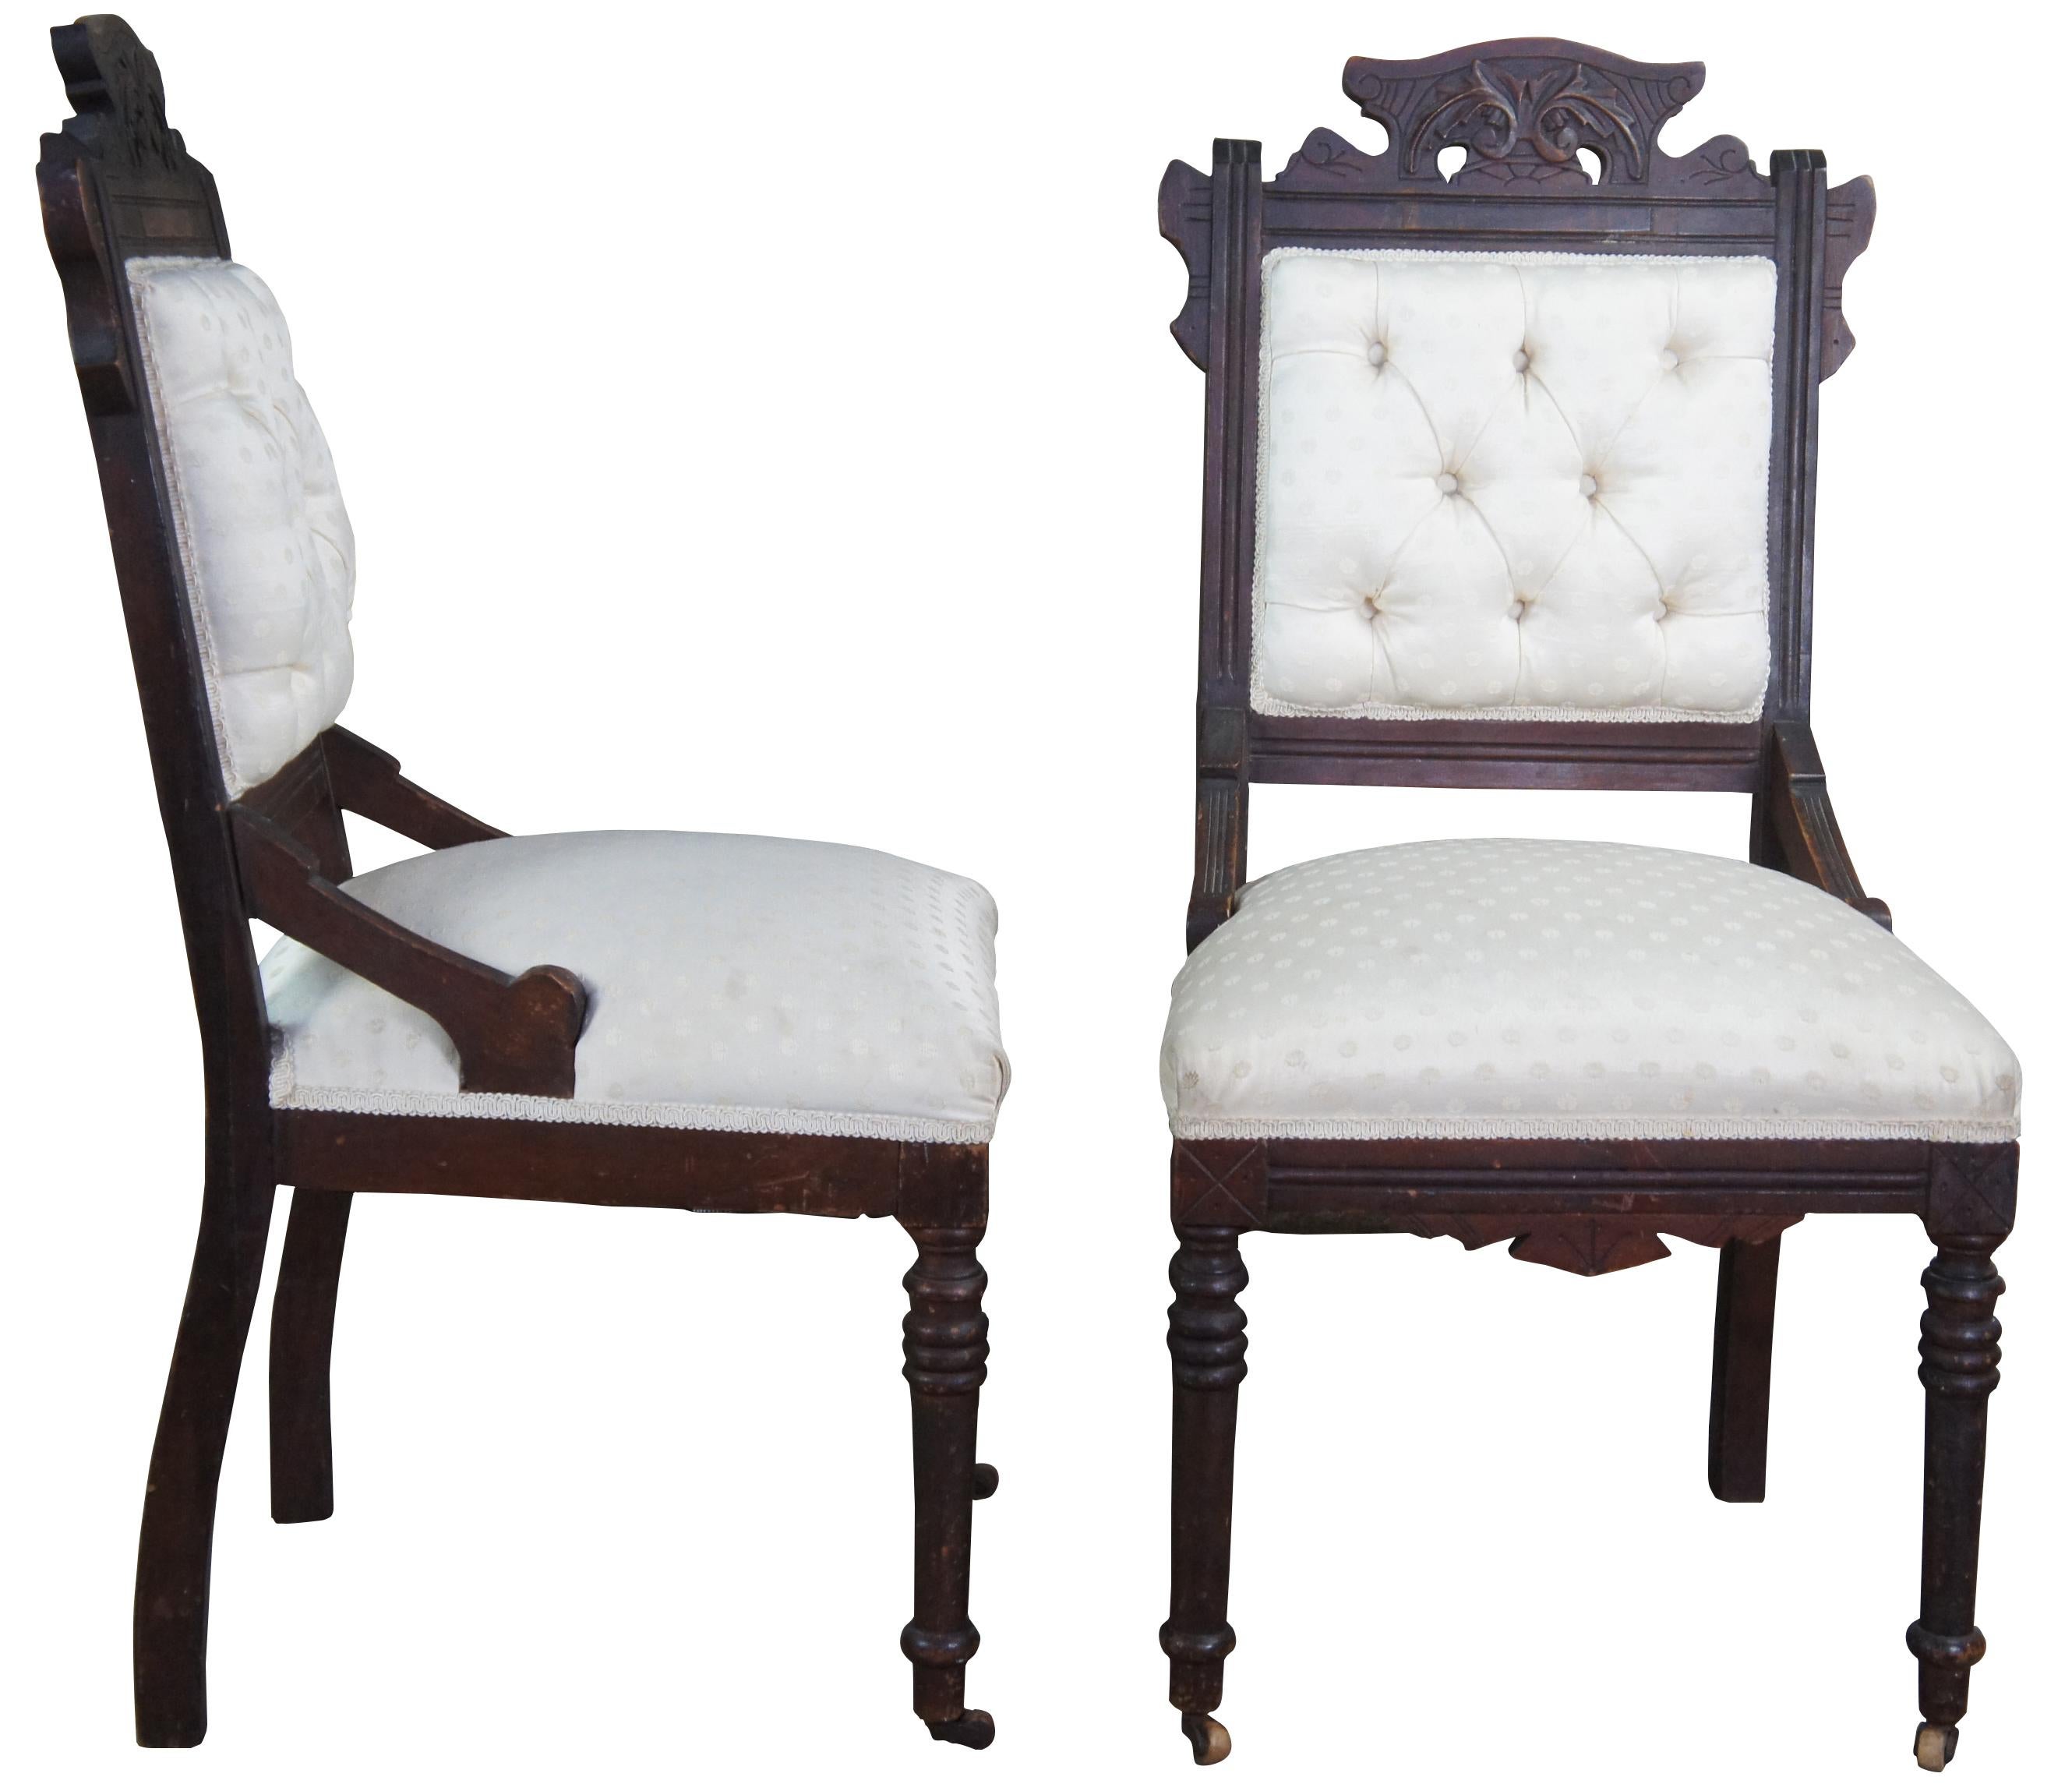 2 Antique Victorian Eastlake carved walnut tufted side accent dining chairs pair.